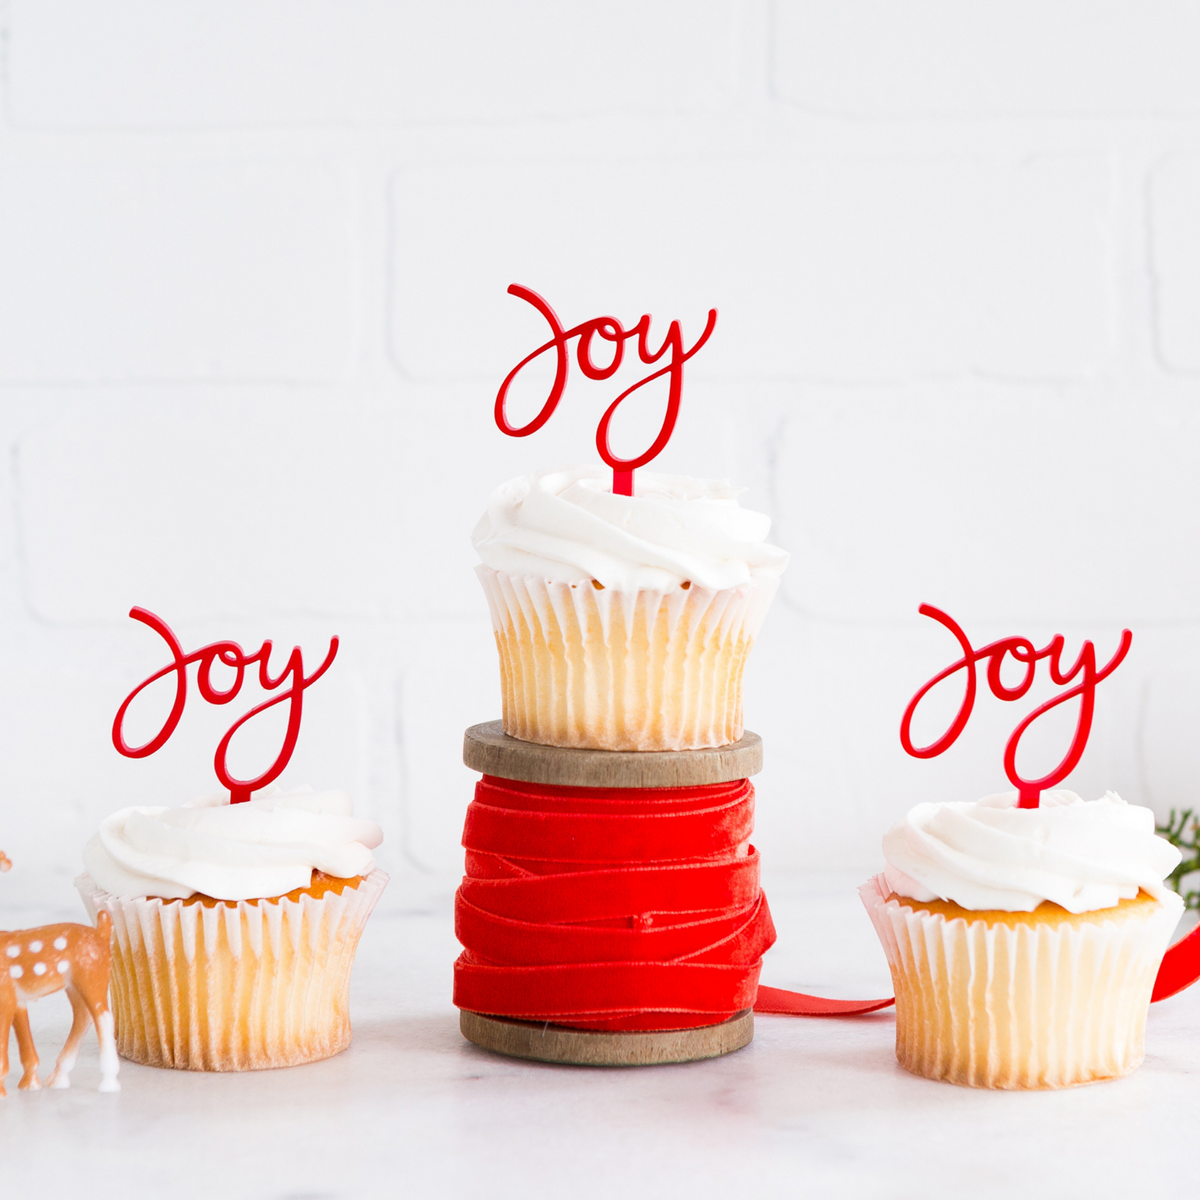 Joy Holiday Cake Toppers